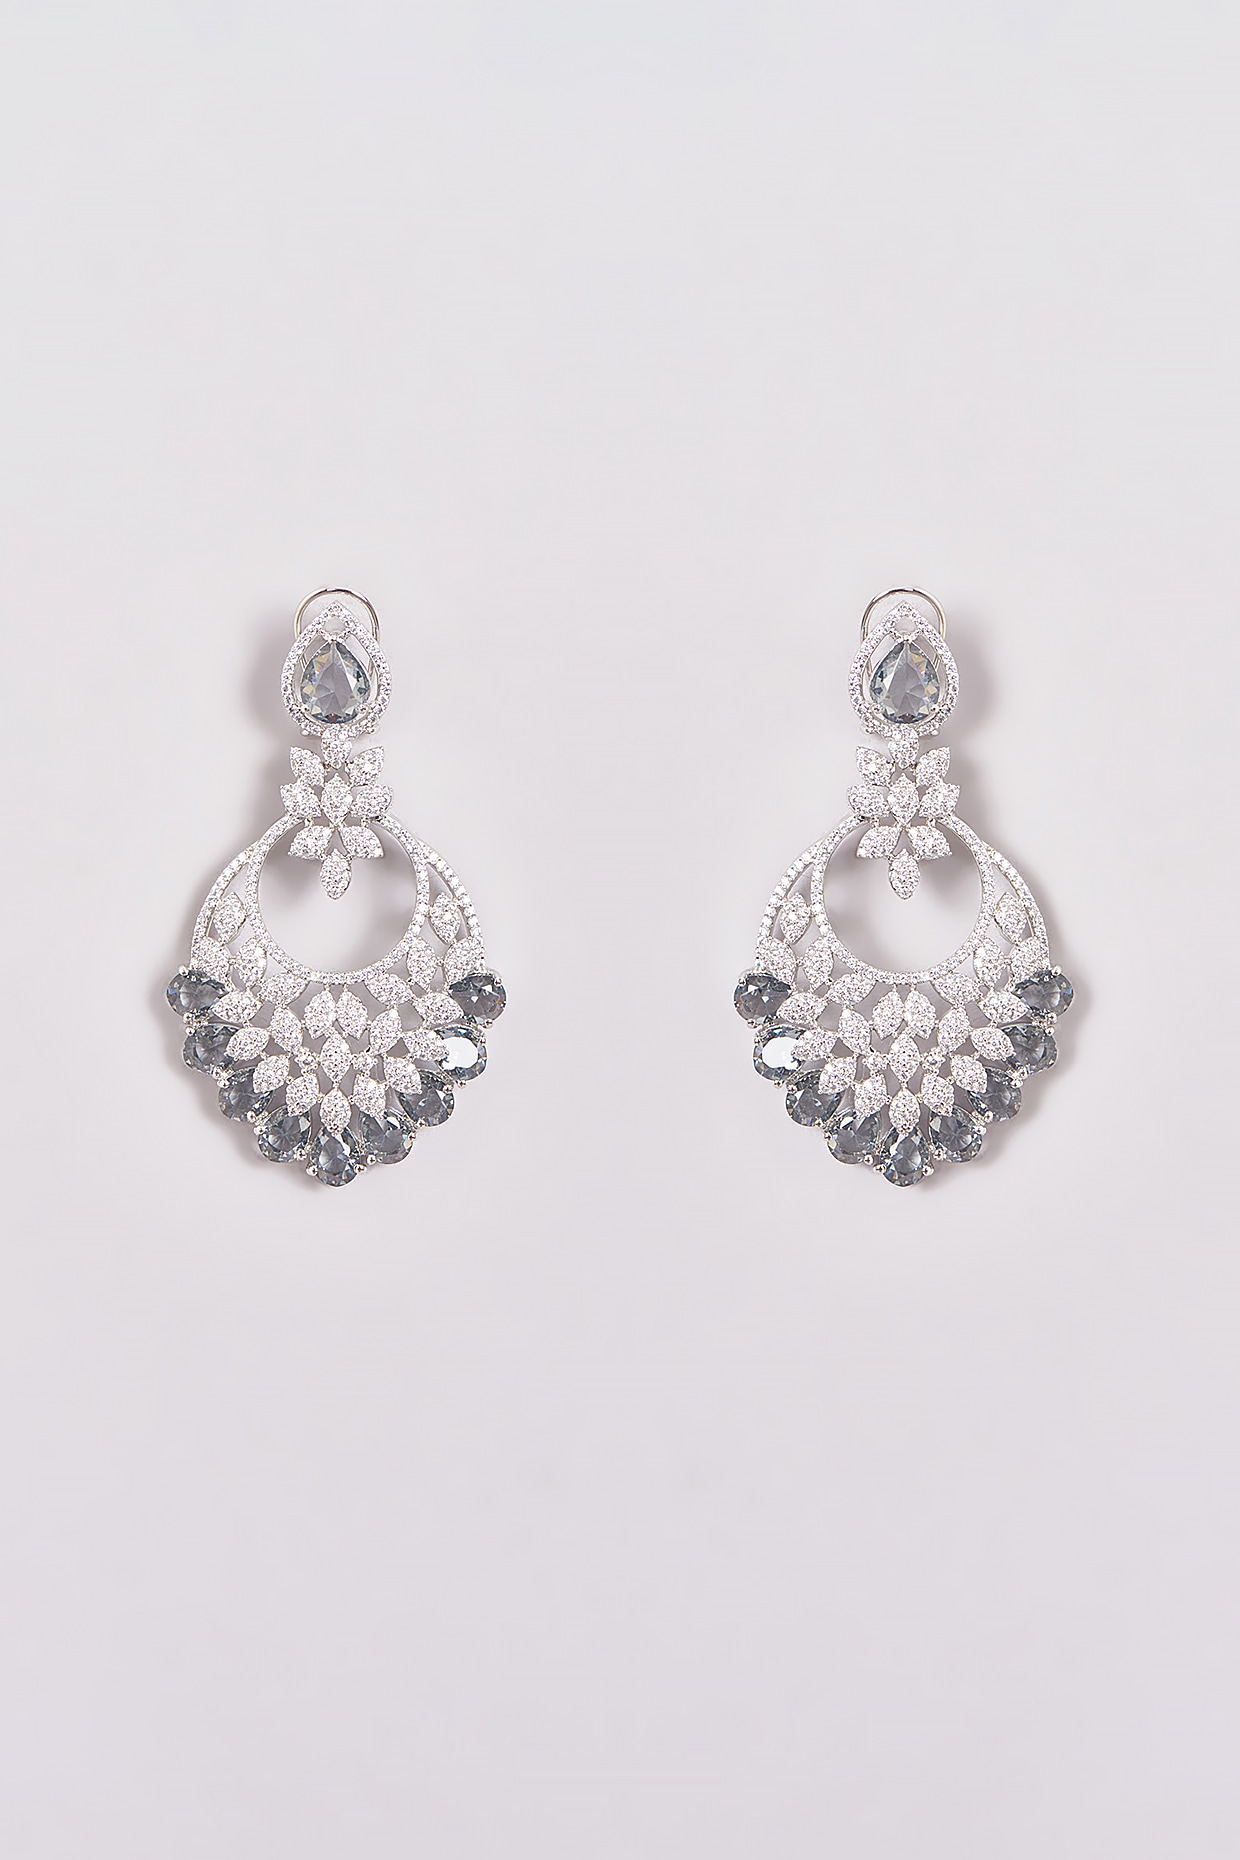 Darcy Collection - Silver Haze Earrings | Kinsley Armelle® Official